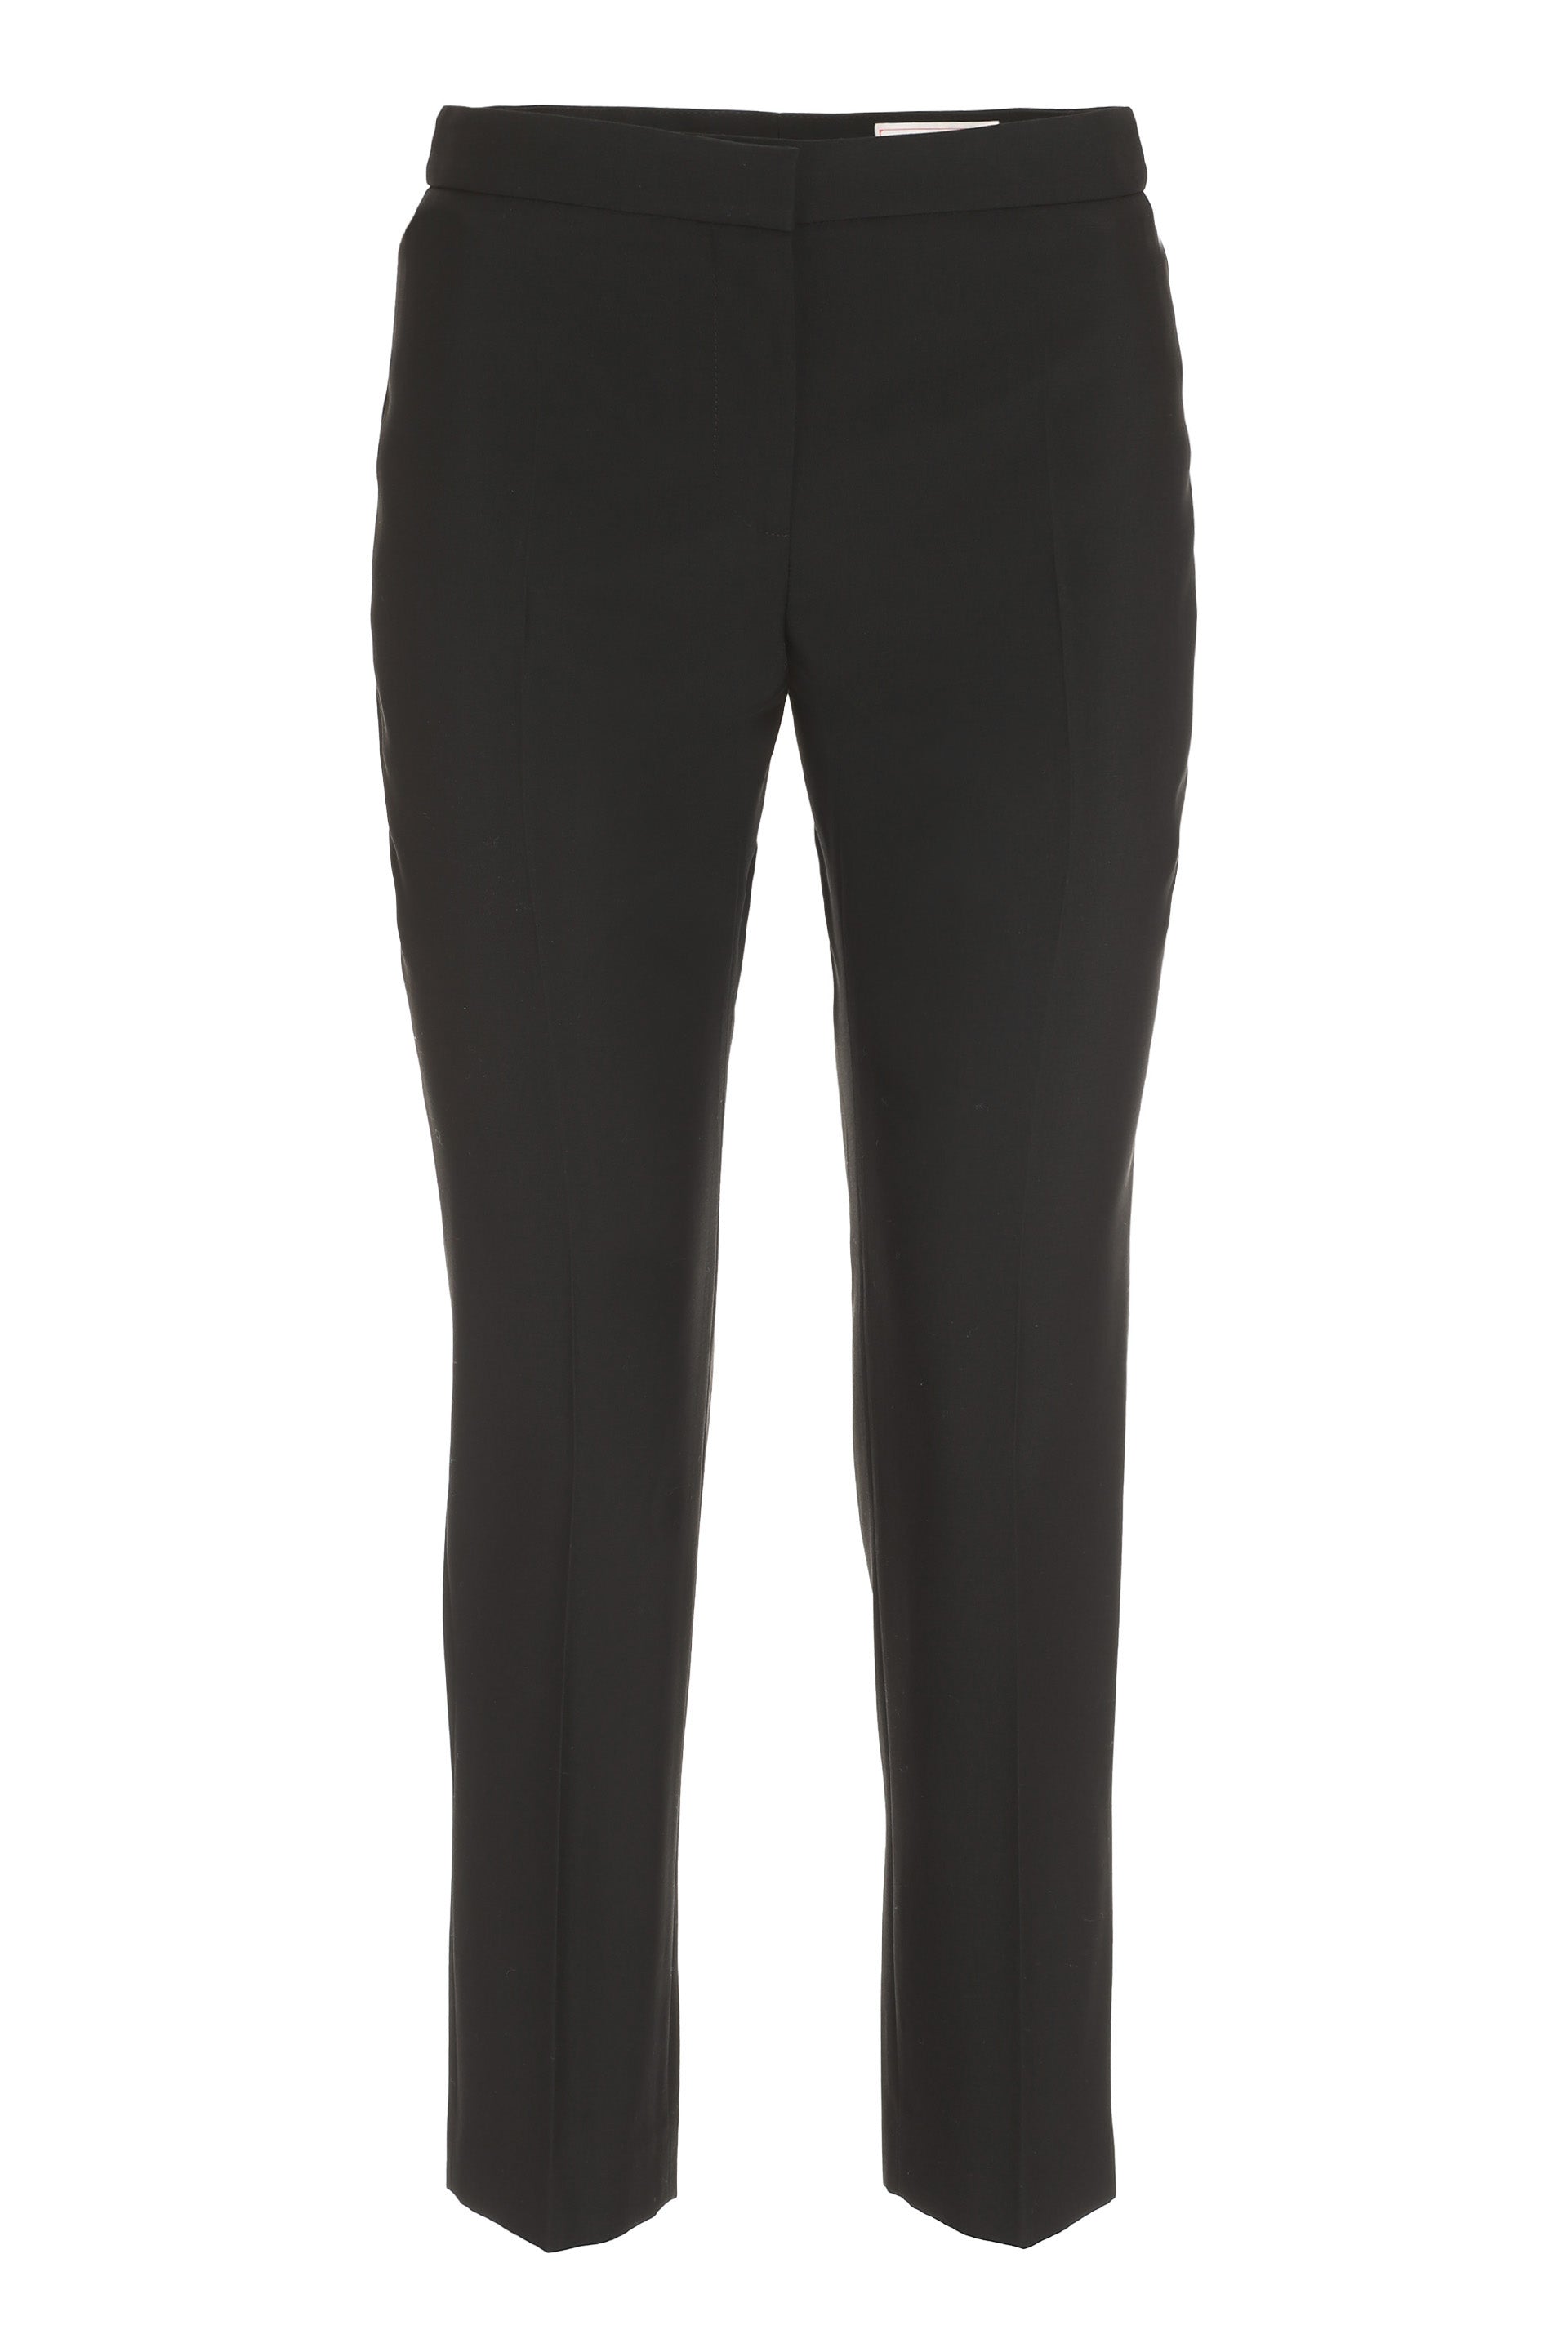 Shop Alexander Mcqueen Black Tailored Cropped Trousers For Women